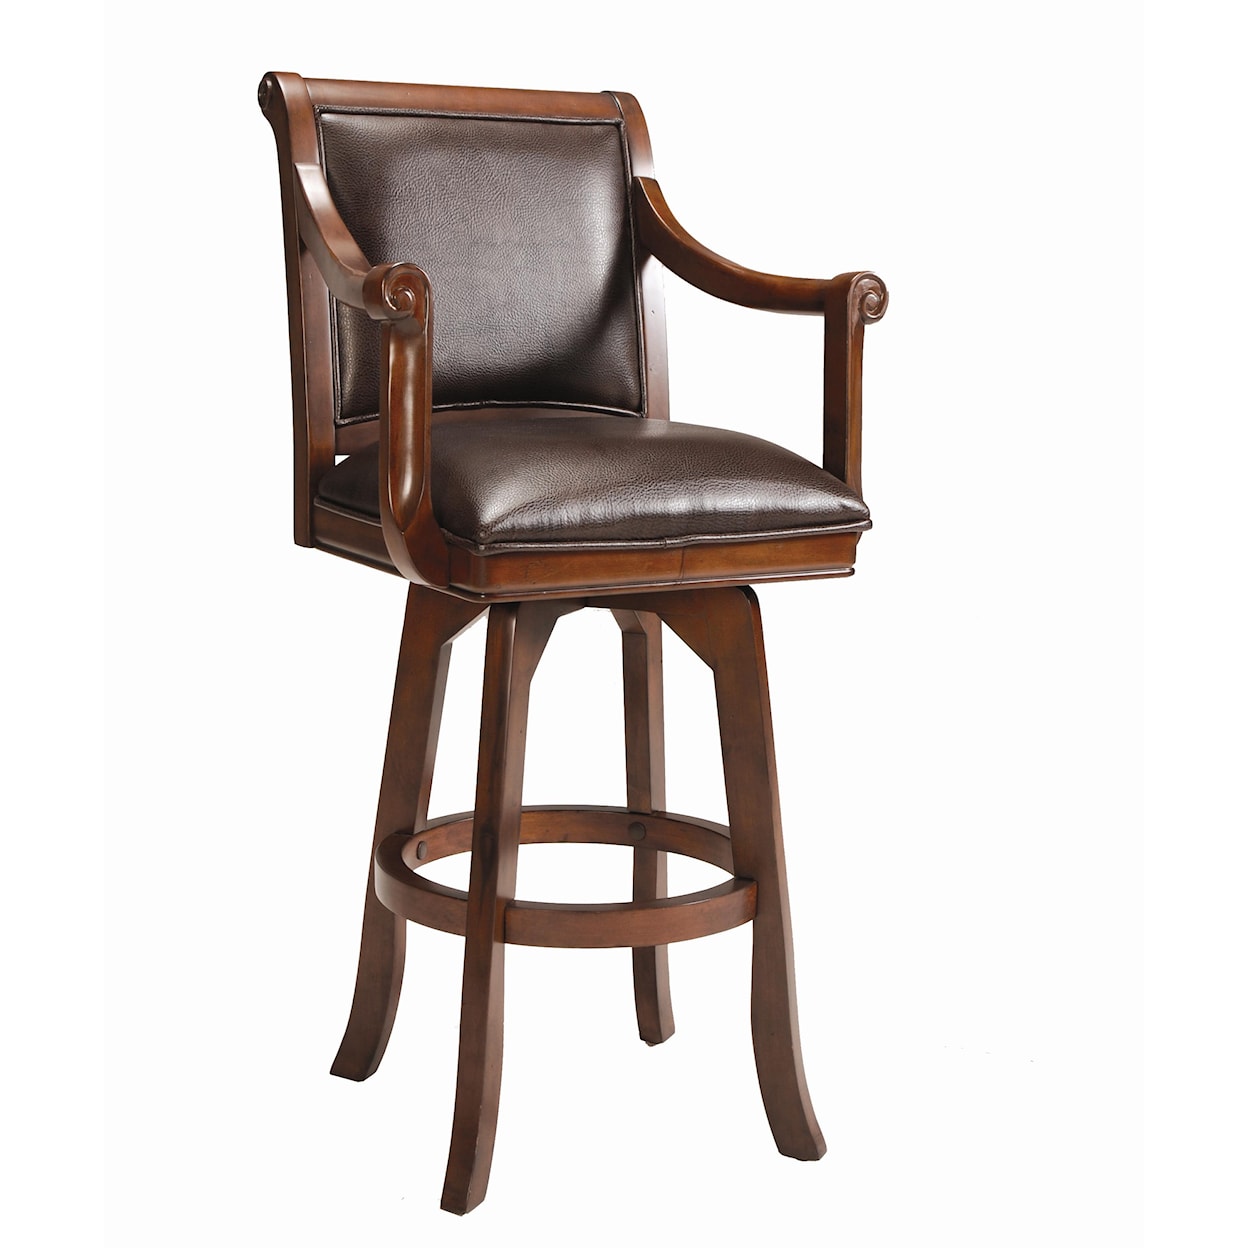 Hillsdale Game Stools & Chairs Palm Springs Swivel Bar Stool